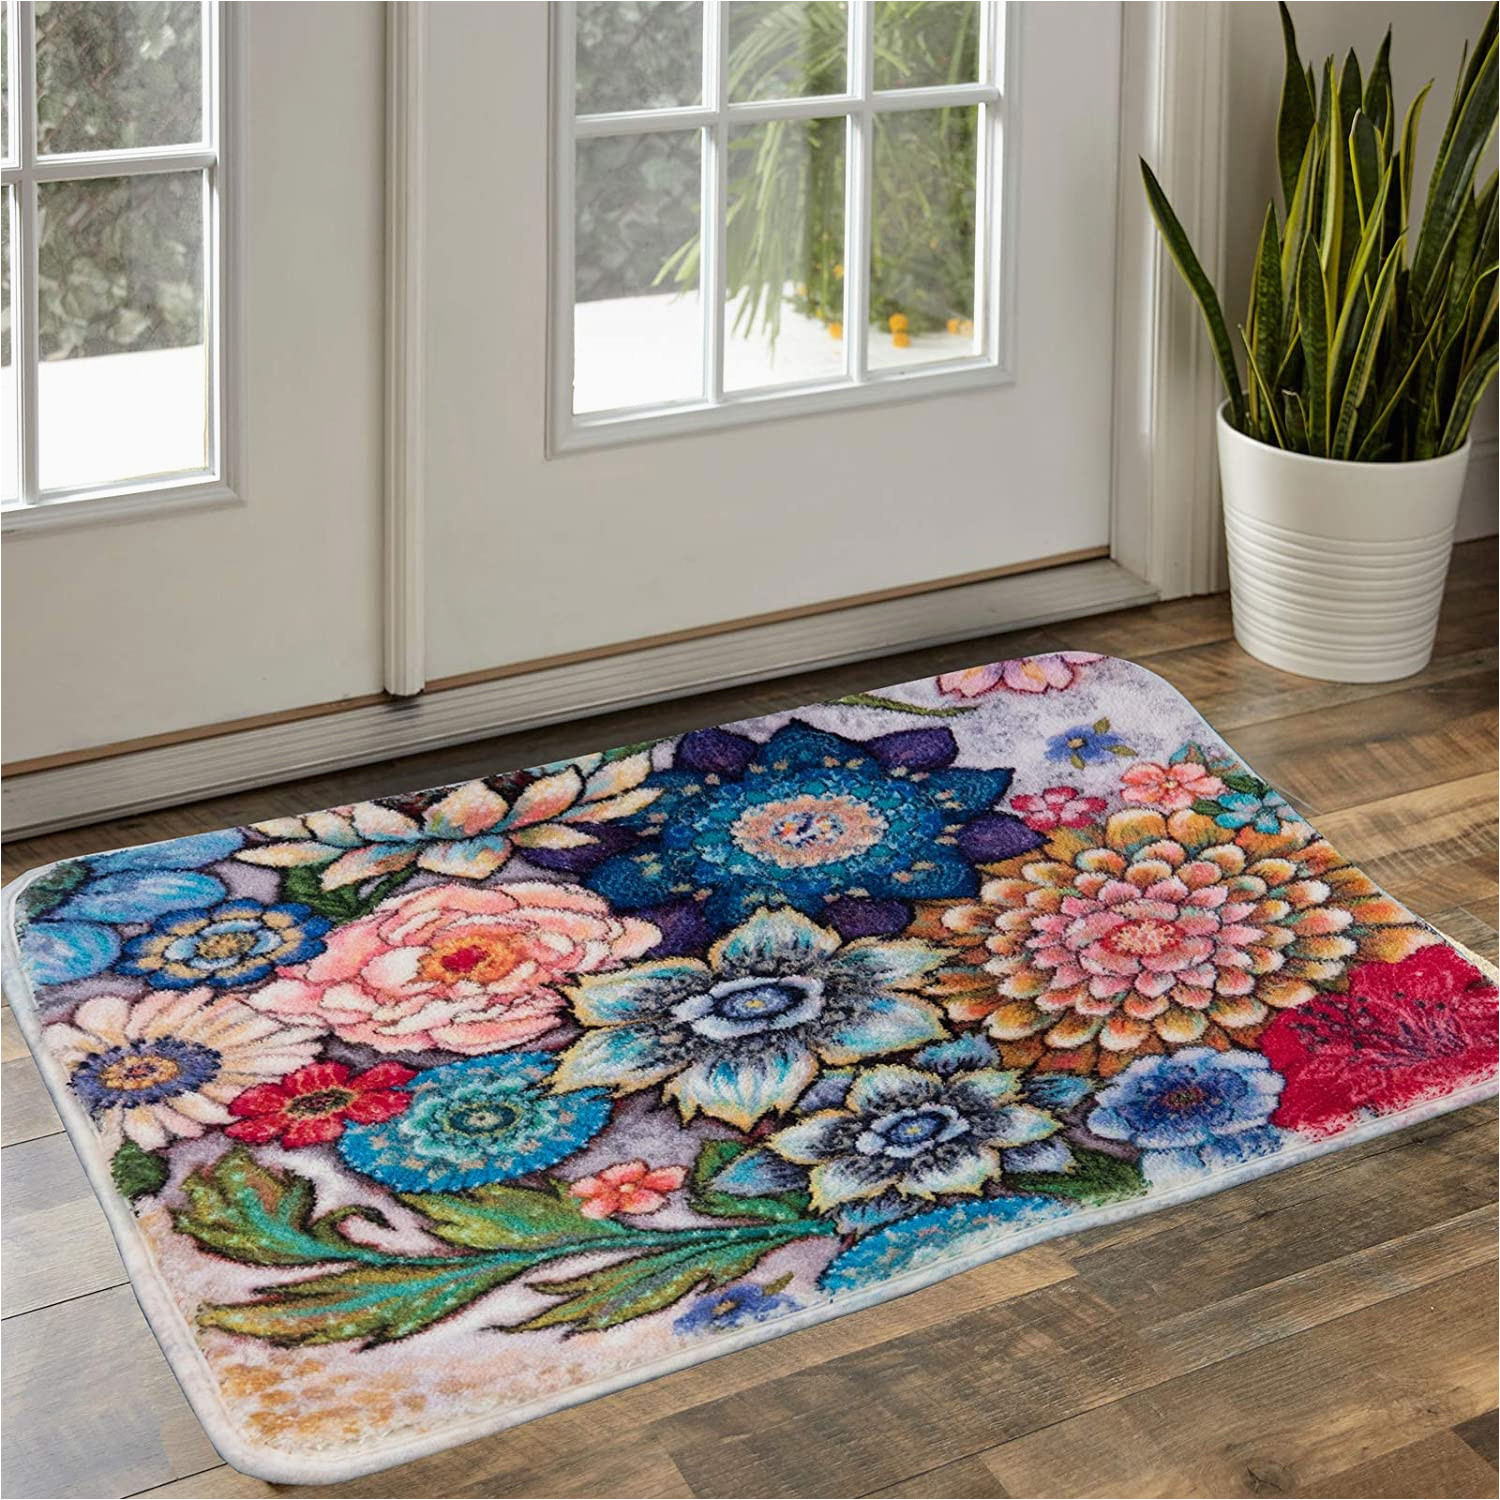 Small area Rugs 2 X 3 Yokii Boho Floral Throw Rugs 2×3 Small area Rug Vintage Distressed Colorful Flow